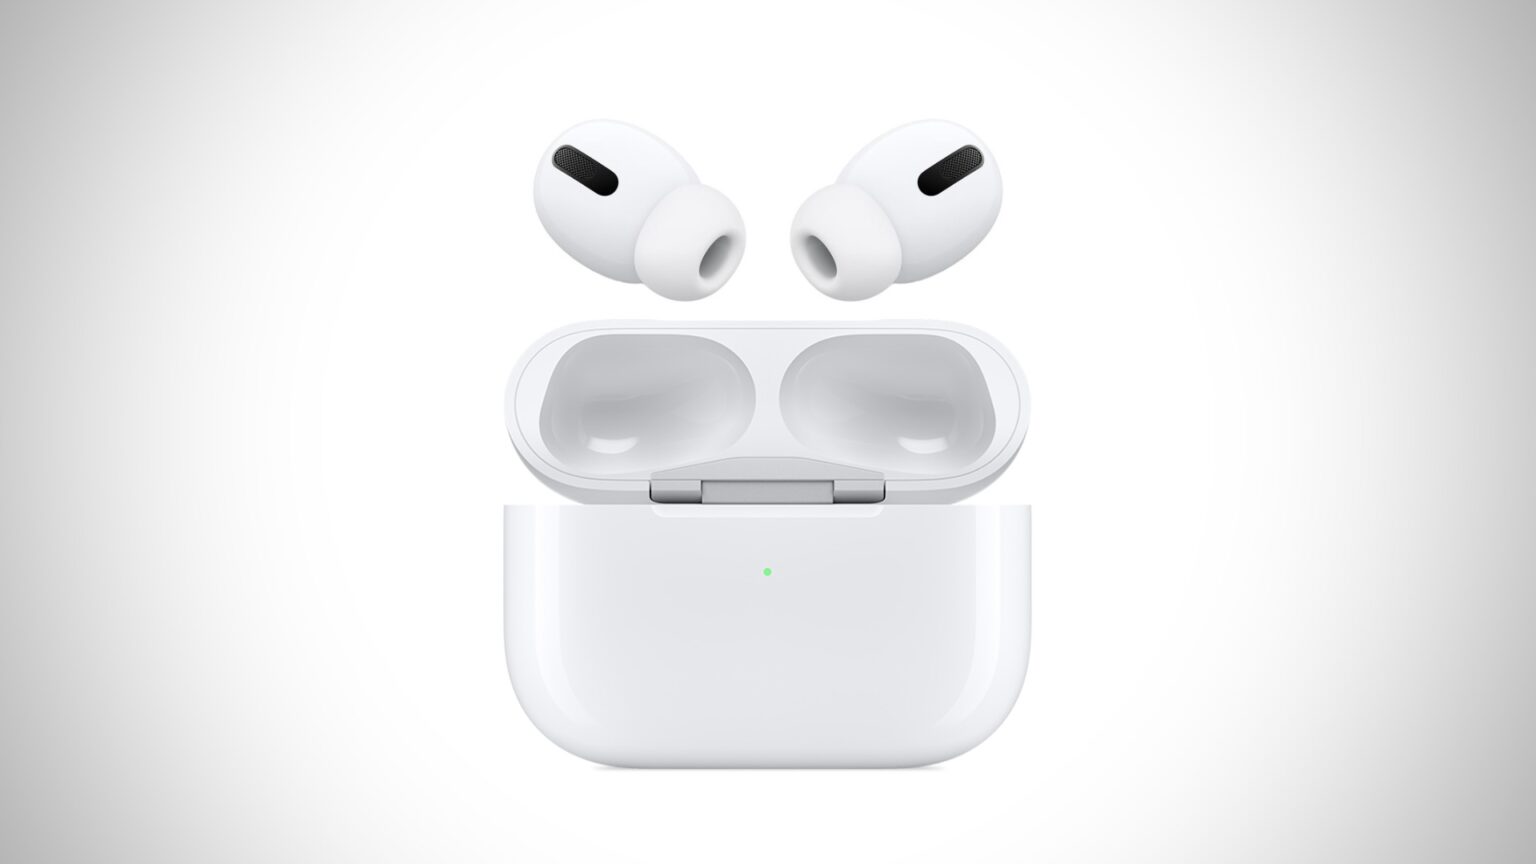 A great deal is a great deal, but the coming AirPods Pro 2 may feature sweet upgrades.